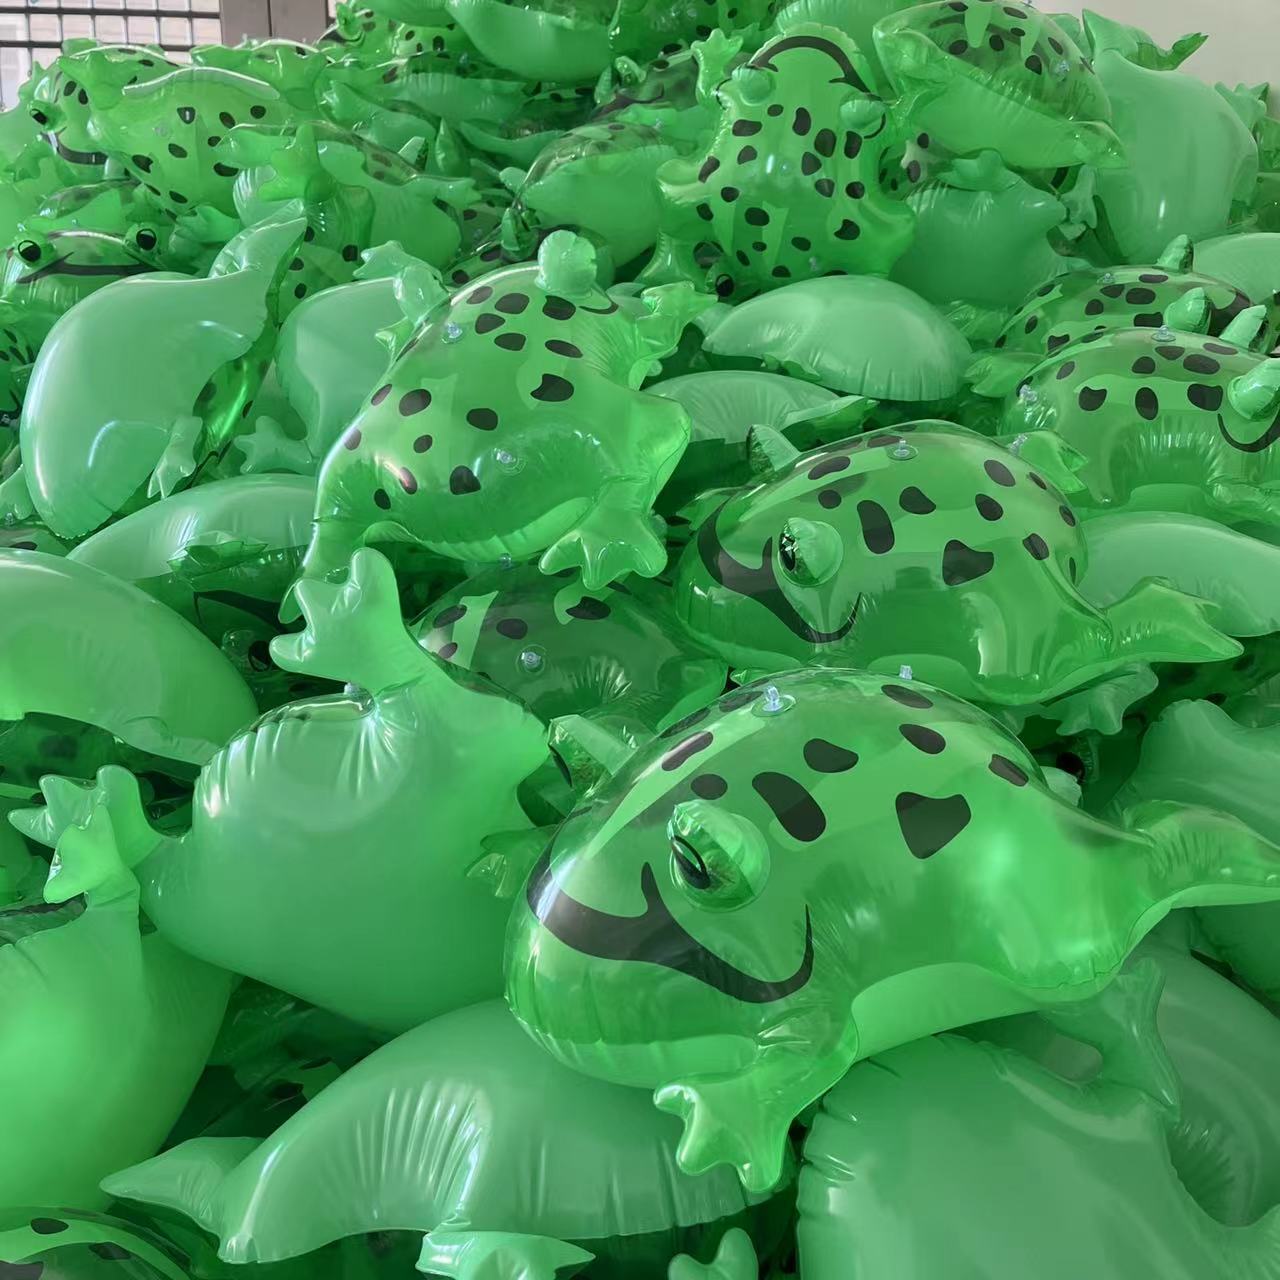 Cross-Border Hot Selling Inflatable Frog PVC Inflatable Cartoon Luminous Frog Children's Toy with Light Flash Drawstring Frog